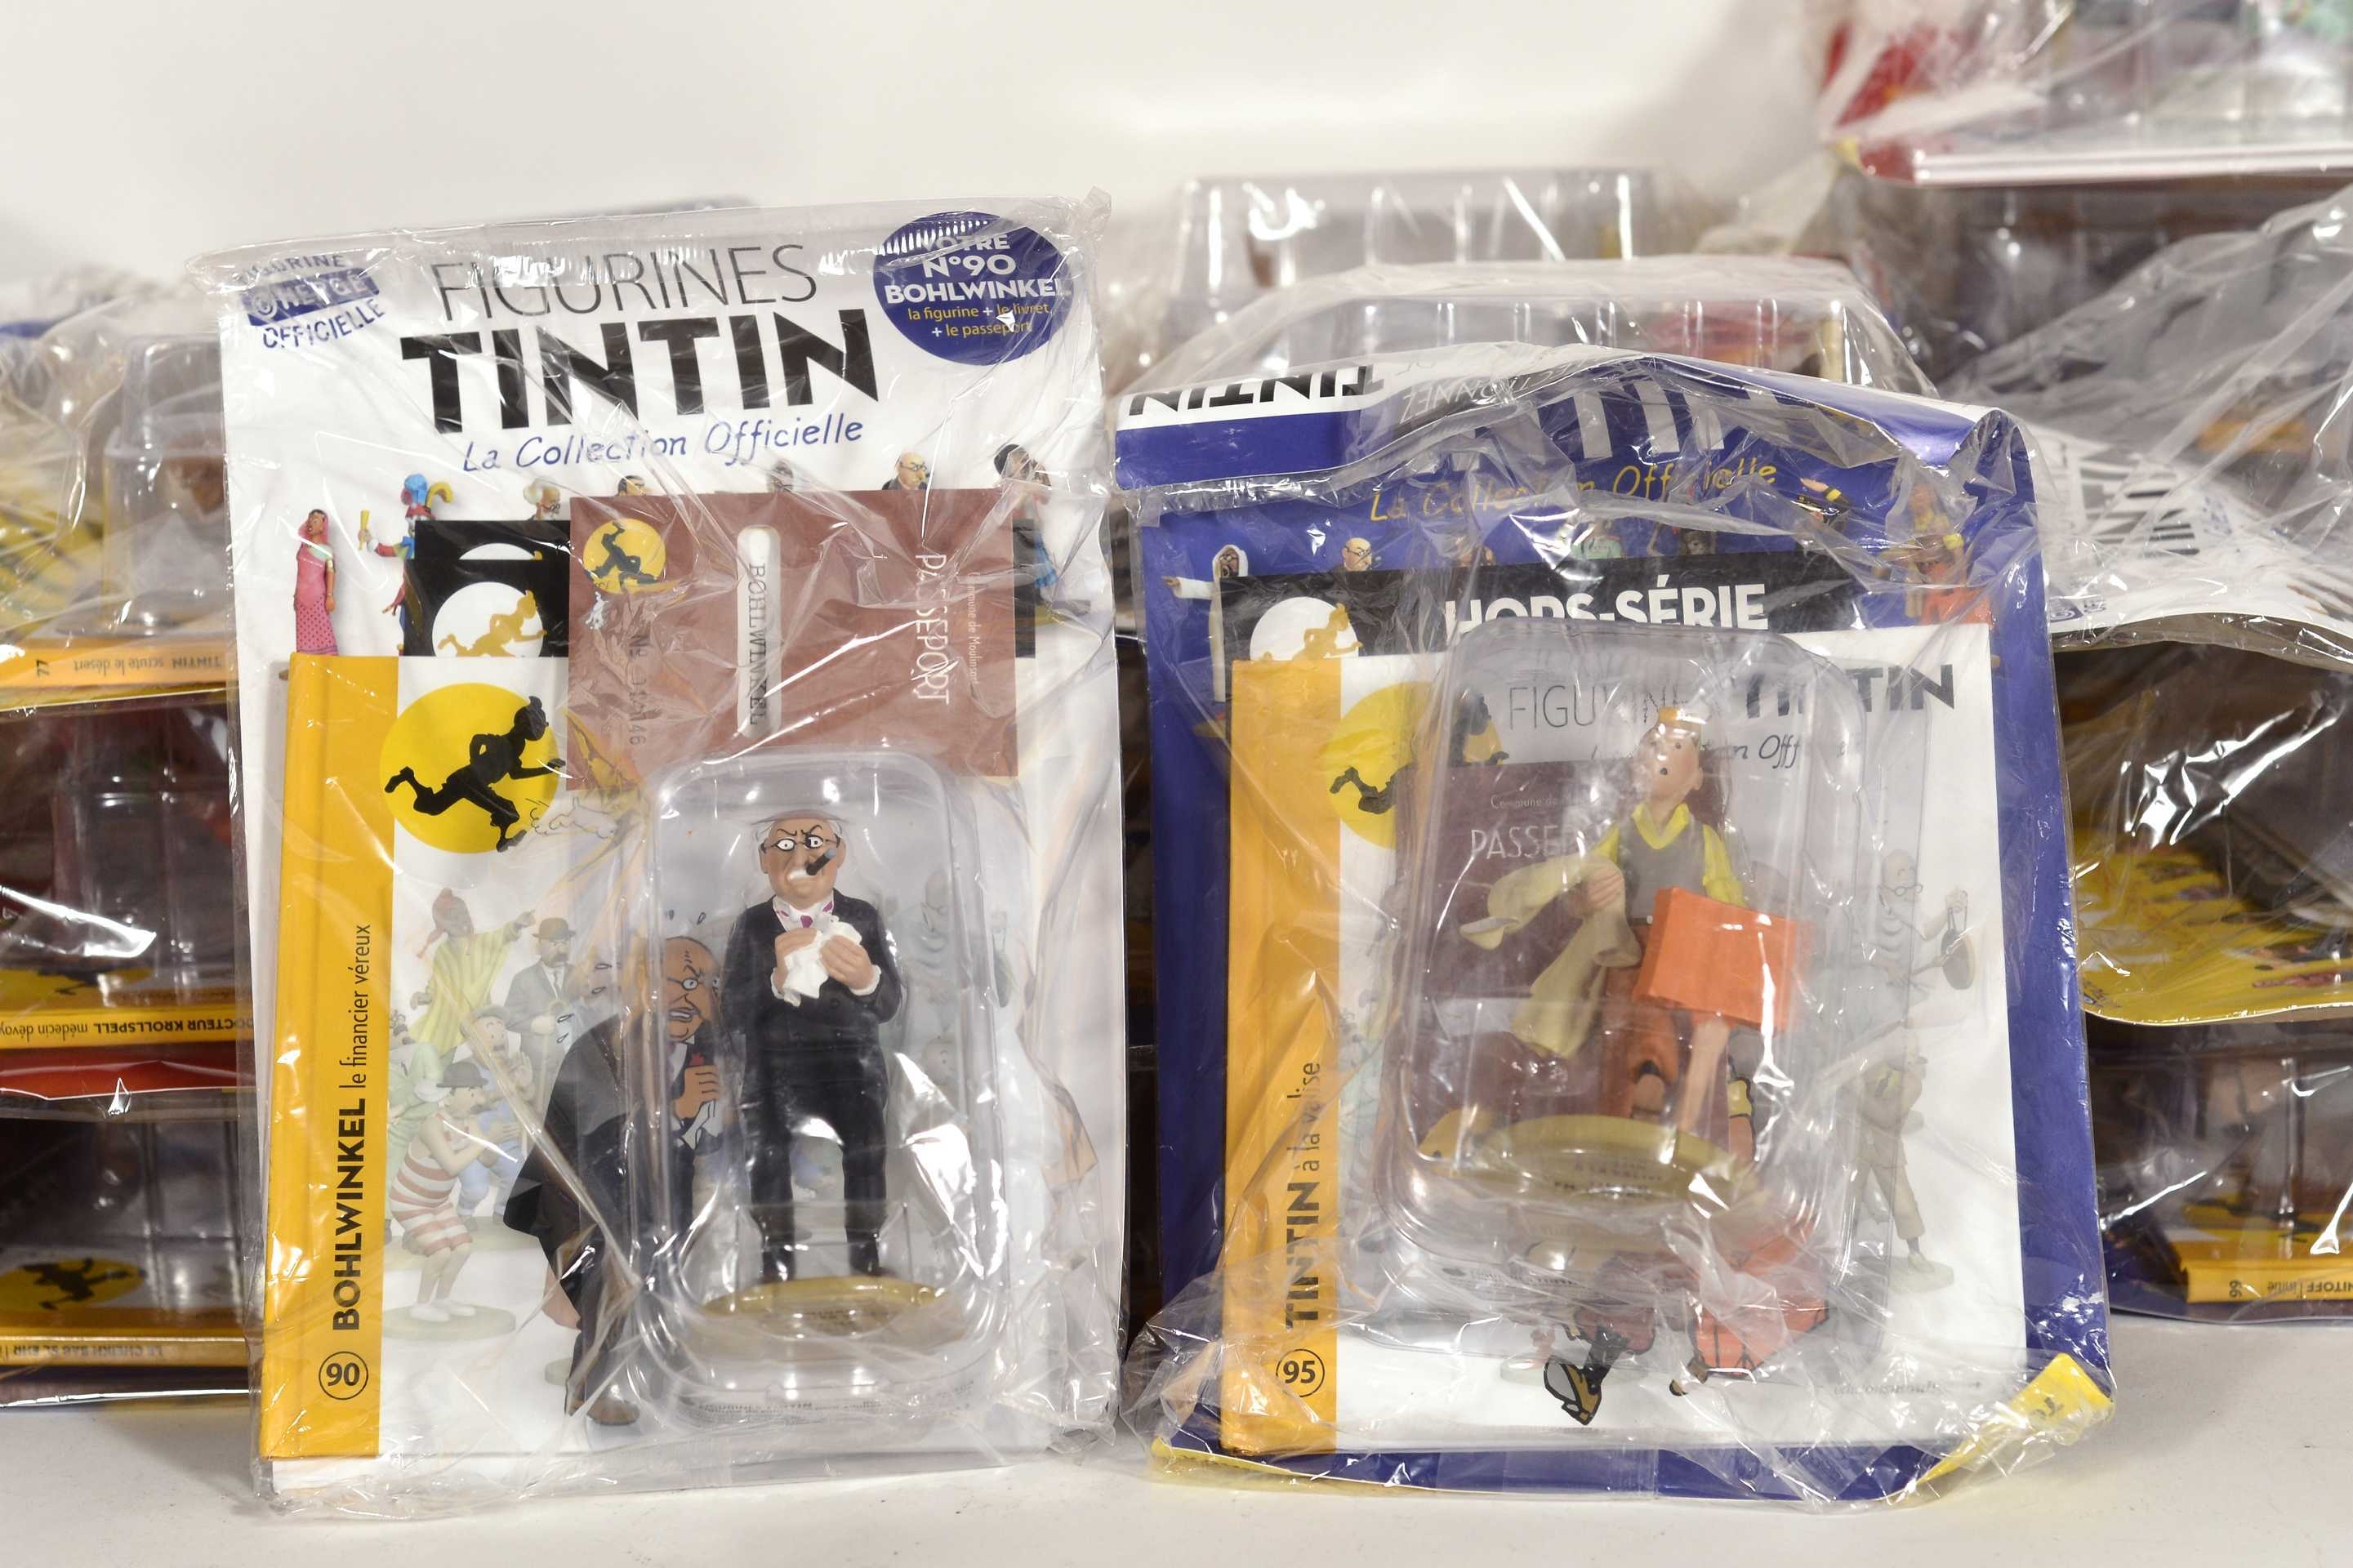 Figurines Tintin - La collection officielle